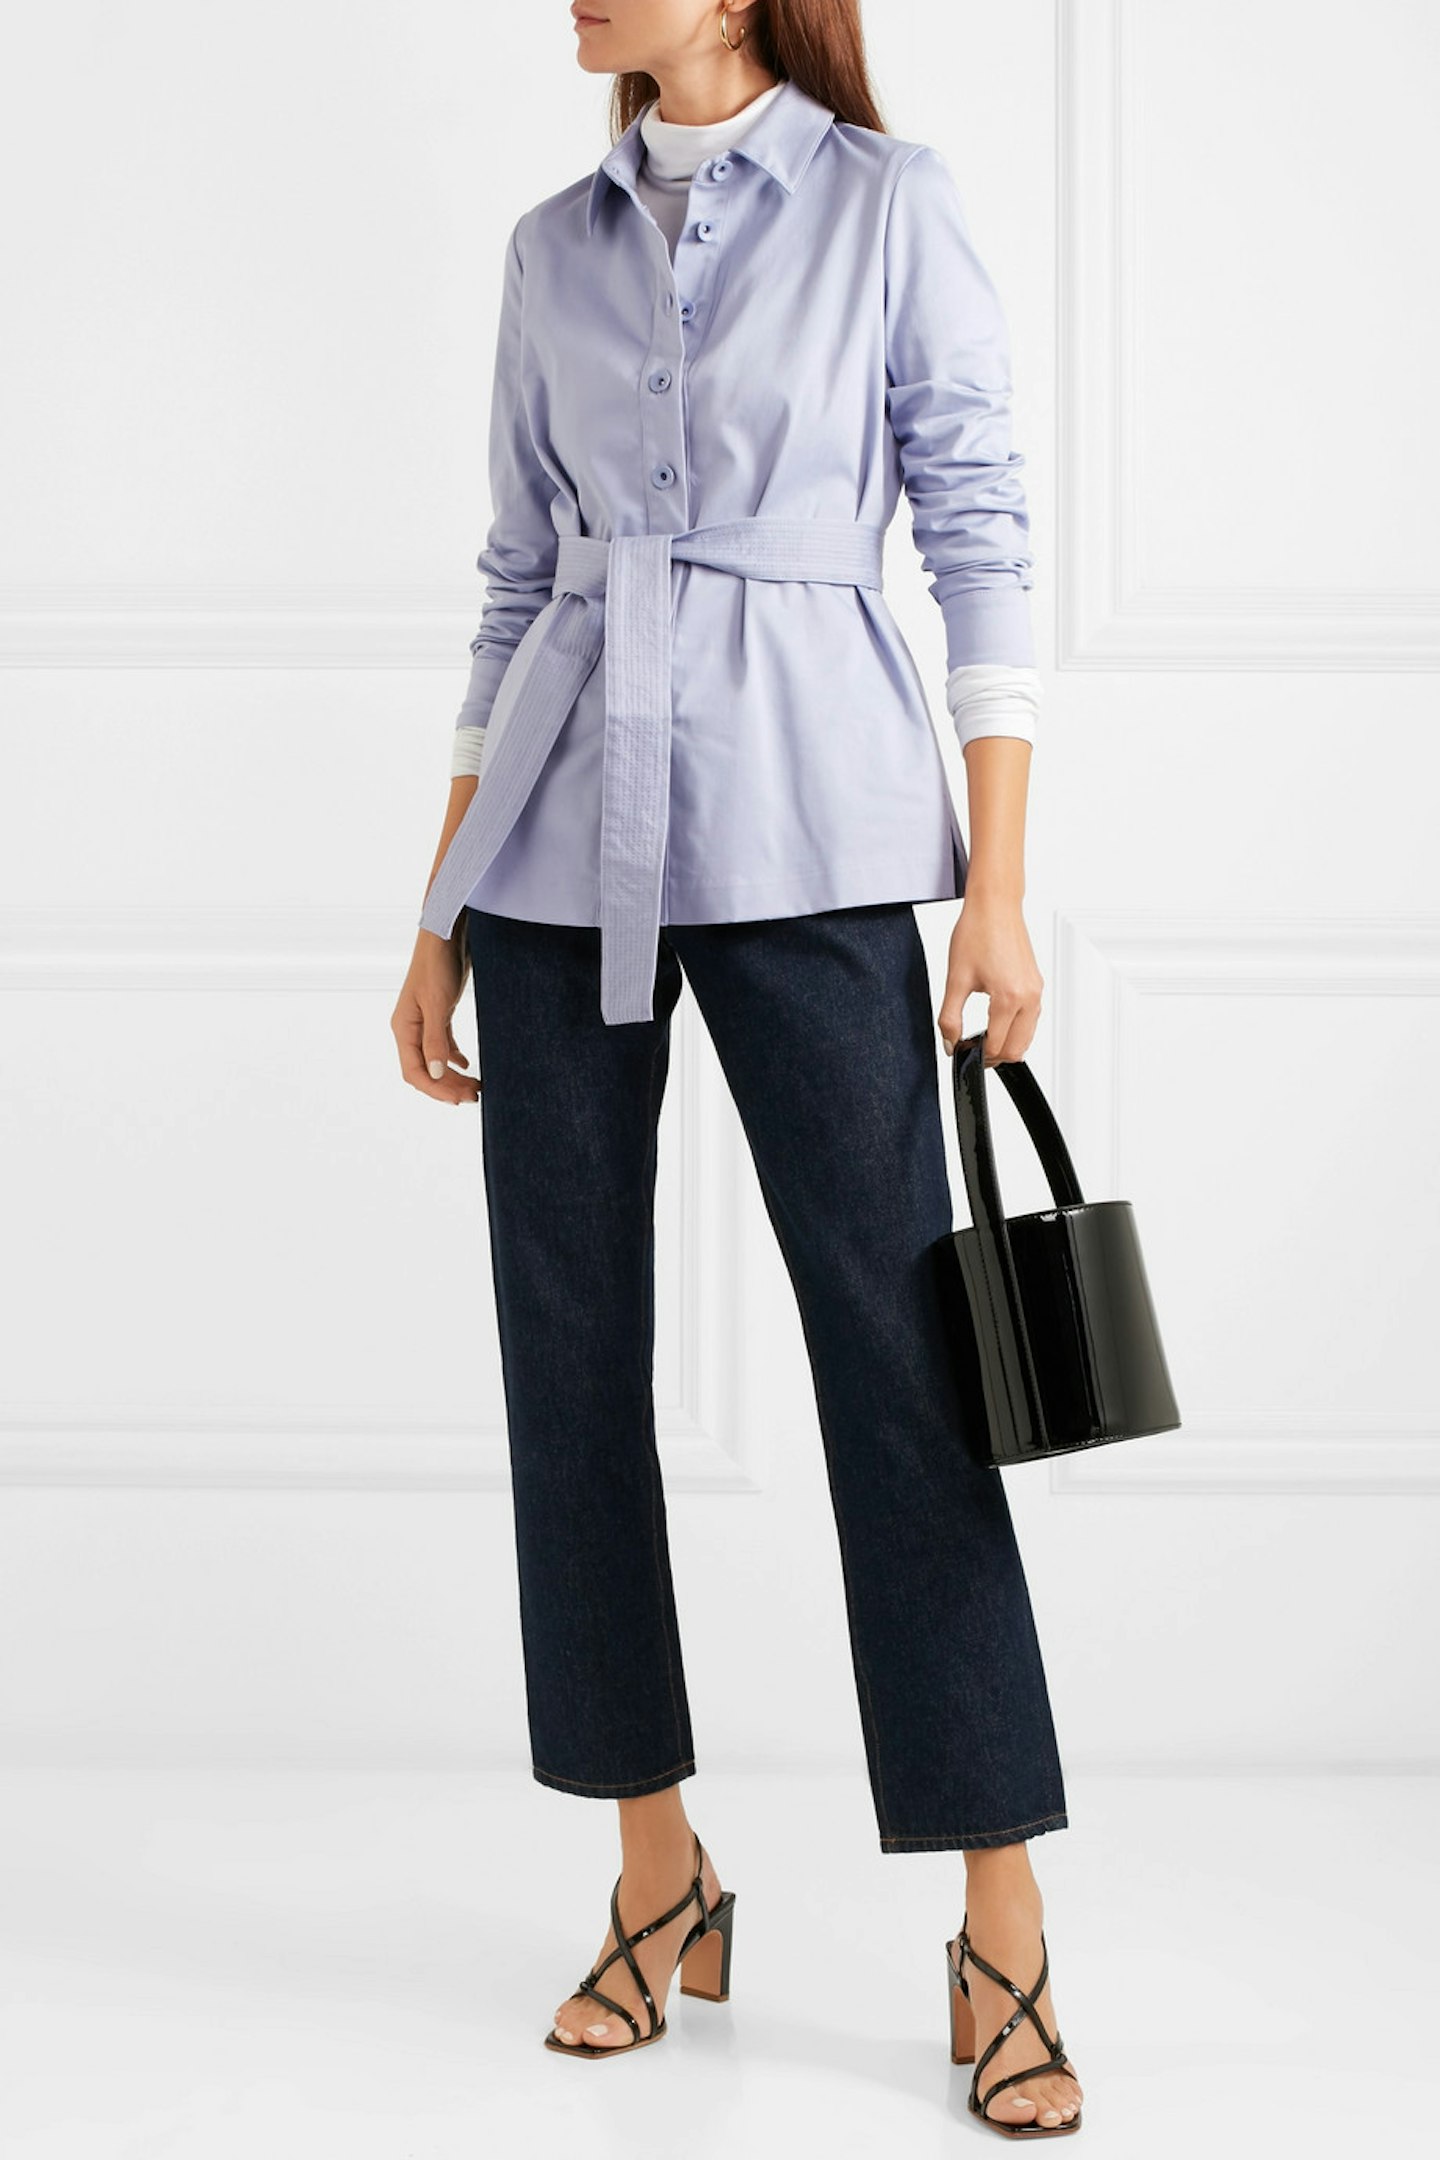 Staud, Lilac Belted Jacket, £195